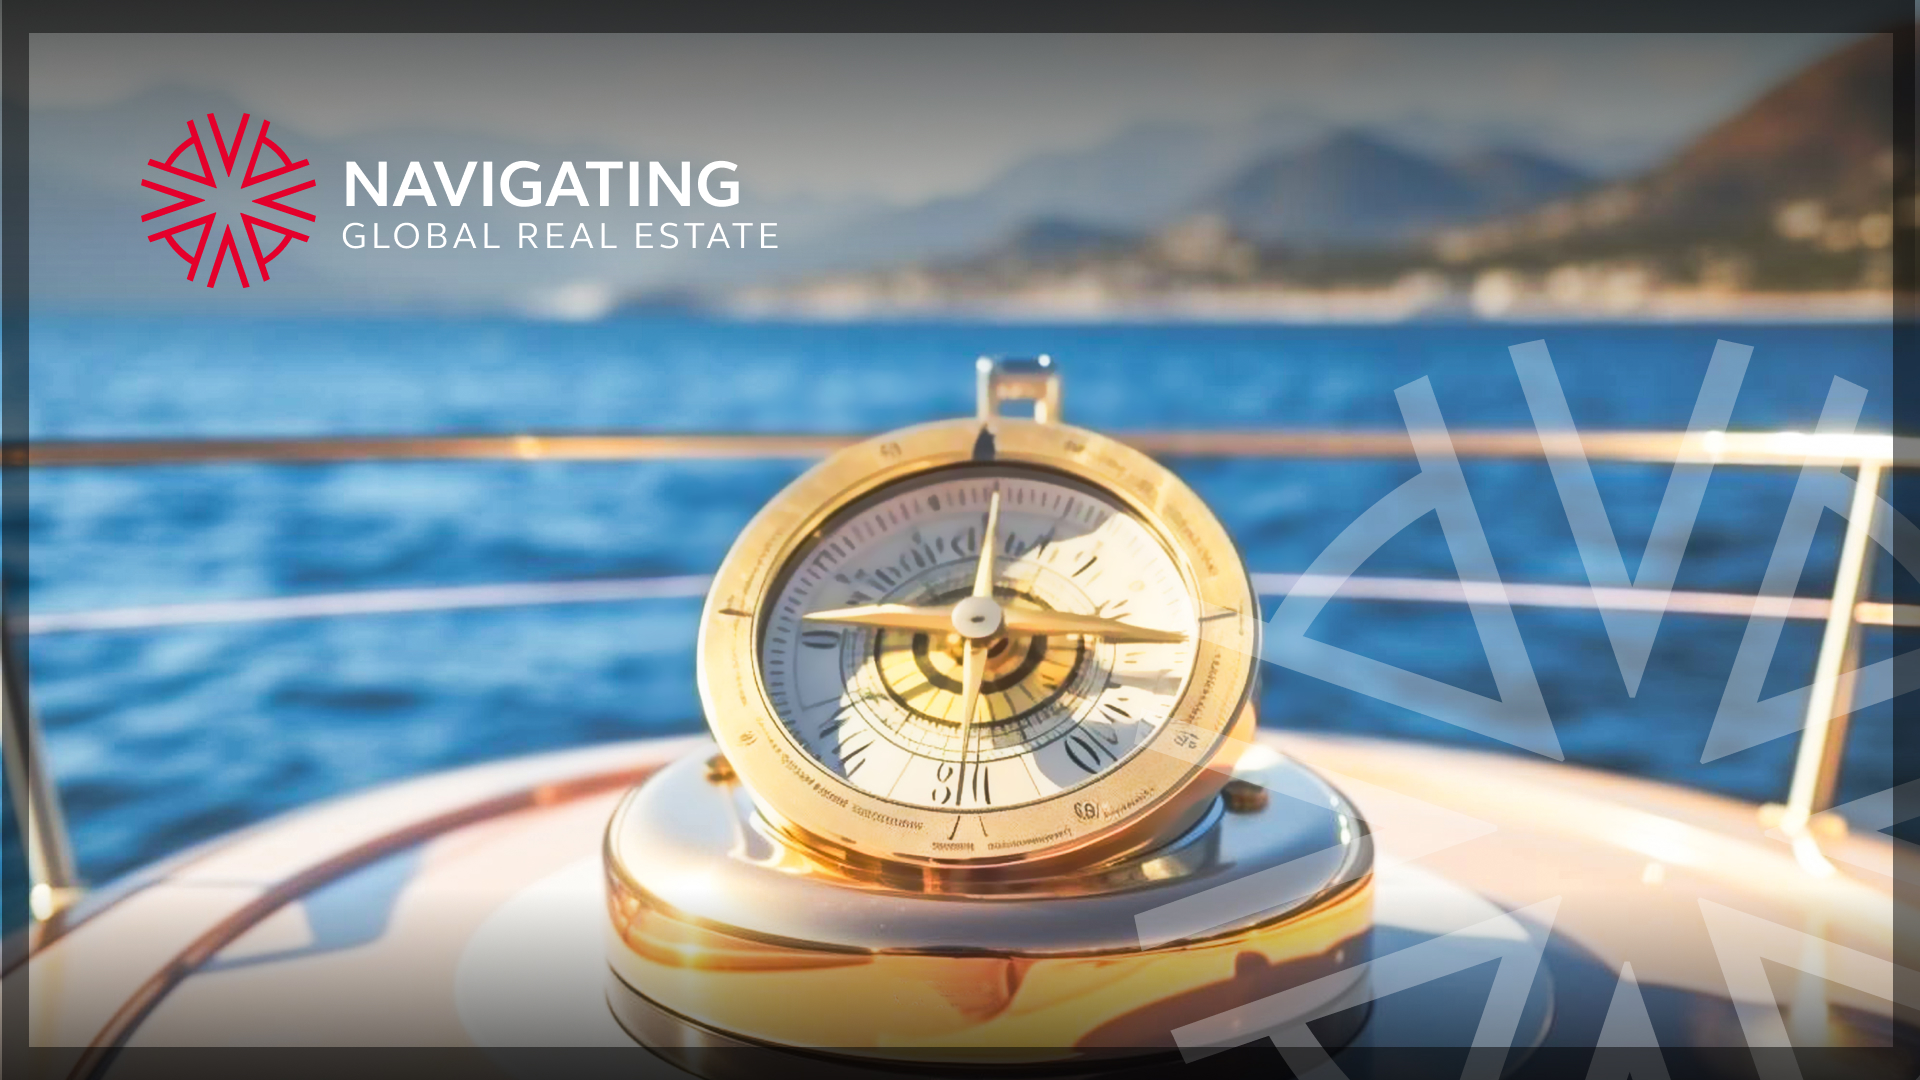 The navigation area of a superyacht showing a gold-plated compass